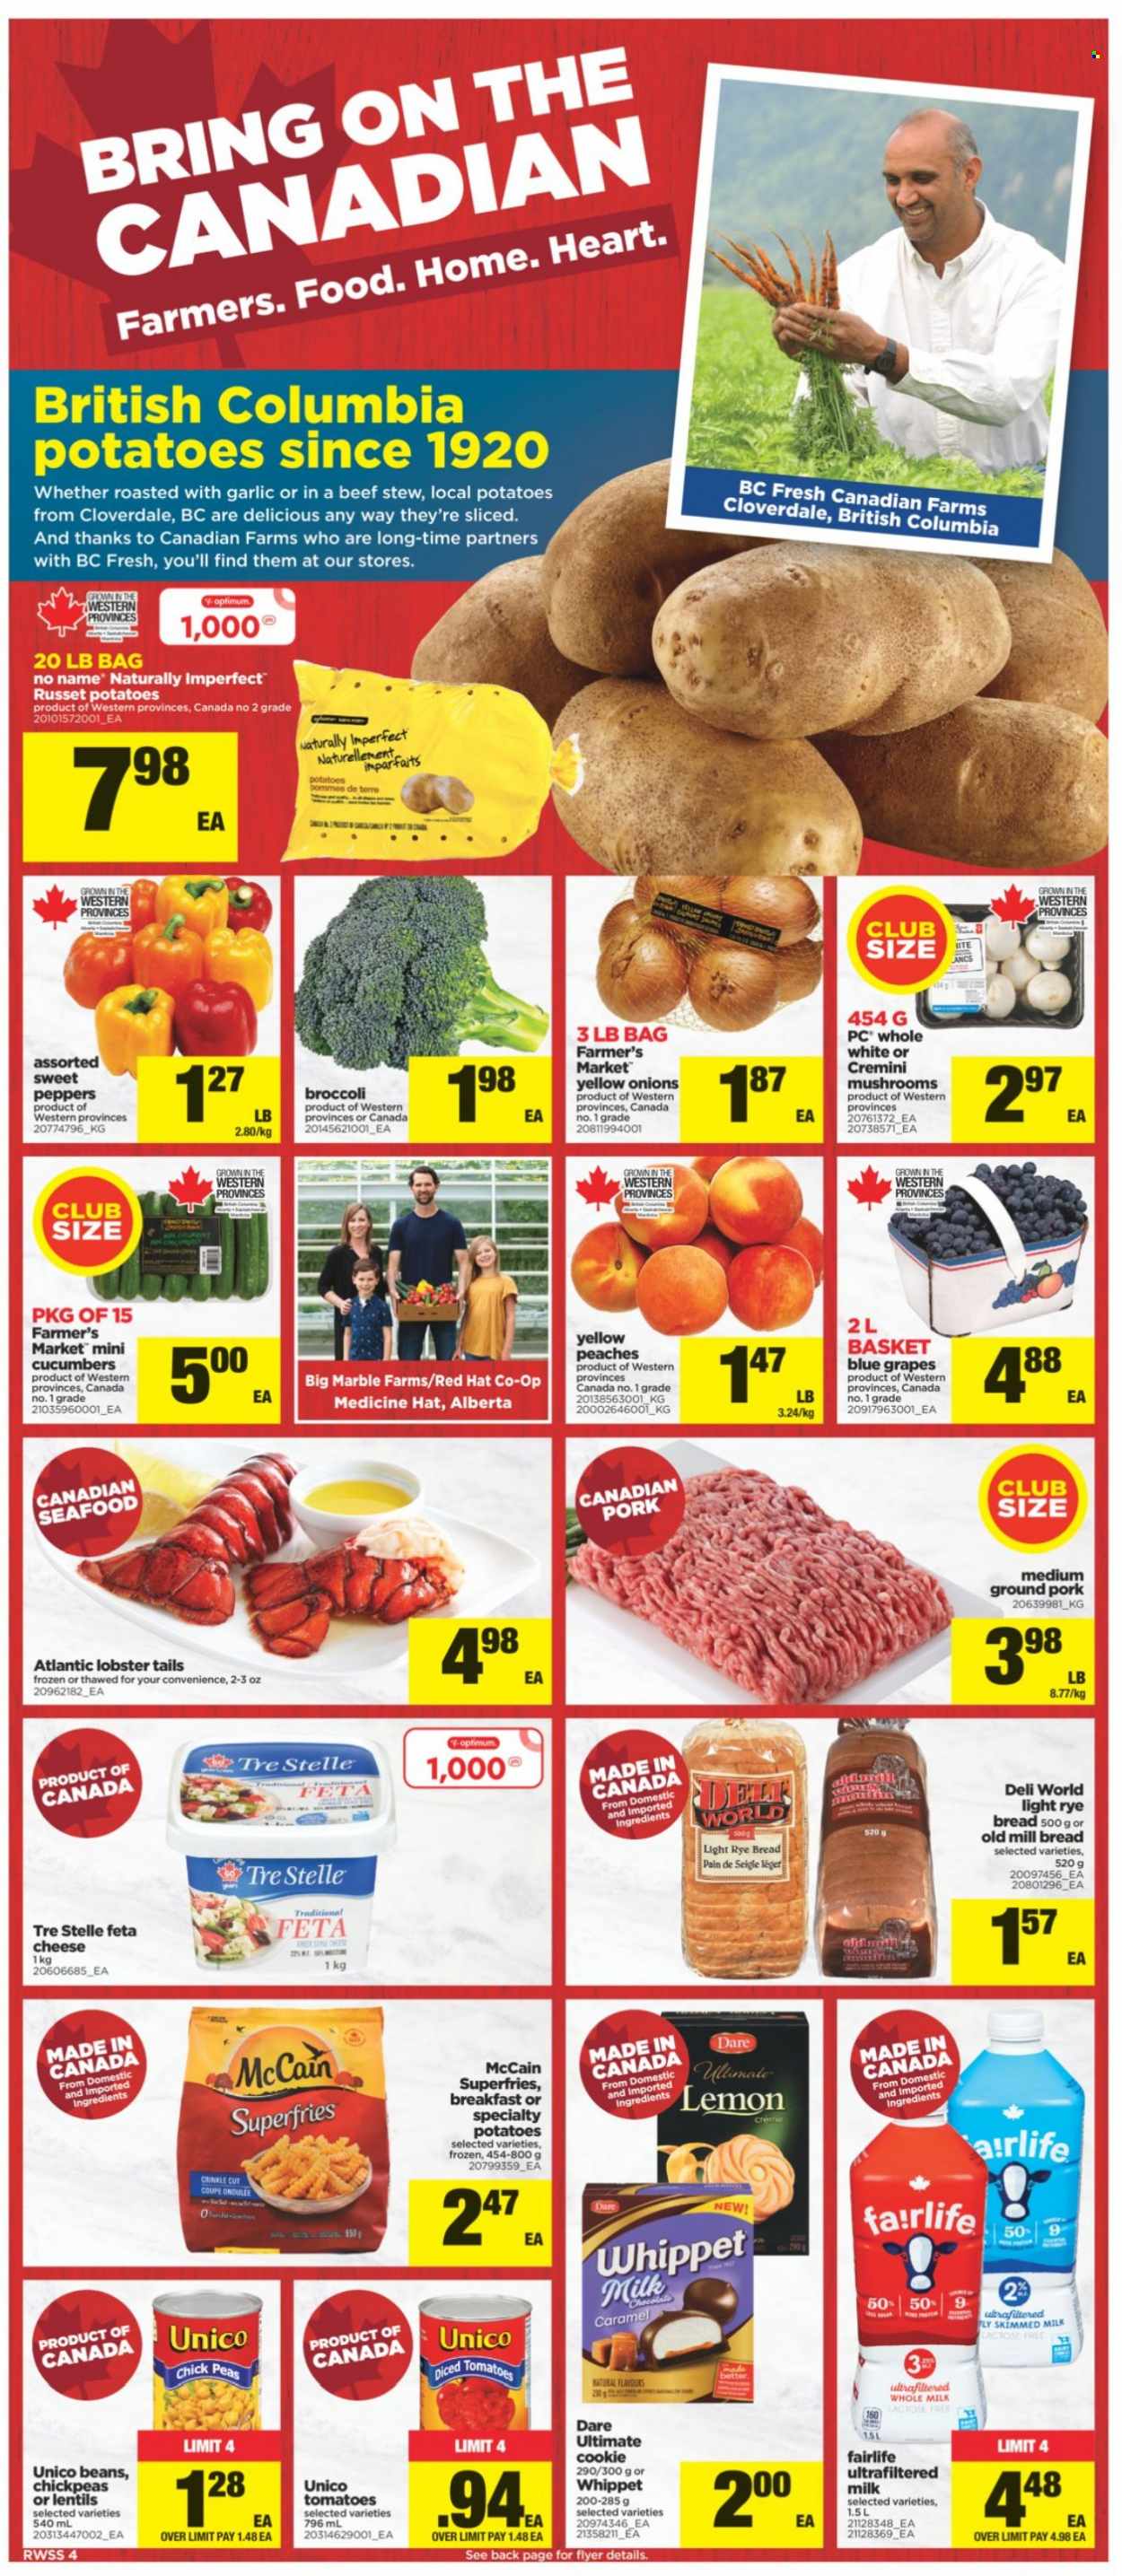 thumbnail - Real Canadian Superstore Flyer - September 10, 2021 - September 16, 2021 - Sales products - russet potatoes, tomatoes, potatoes, onion, grapes, peaches, lobster, seafood, lobster tail, No Name, cheese, feta, milk, McCain, potato fries, lentils, chickpeas, caramel, ground pork, Optimum, basket. Page 4.